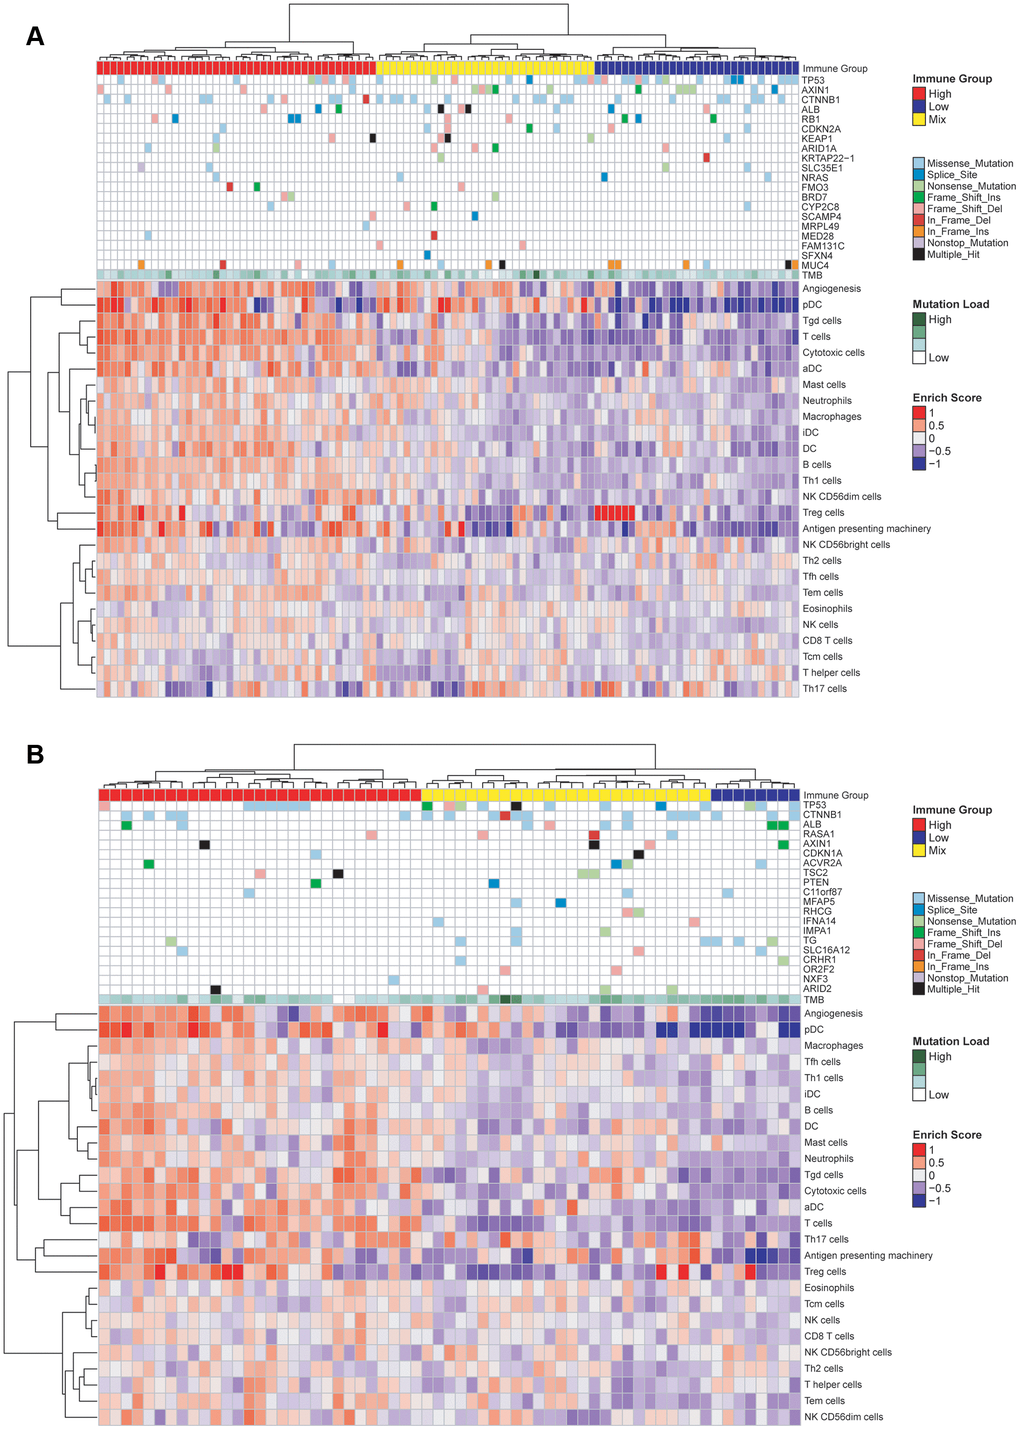 Characterization of immune infiltration and gene mutations in the TCGA-HBV-HCC and TCGA-Alcol-HCC groups. (A) Heat map shown the normalized GSVA score, tumor mutation burden (TMB) and the most common 20 mutation genes in the TCGA-HBV-HCC group. (B) Heat map shown the normalized GSVA score, TMB and the most common 20 mutation genes in the TCGA-Alcol-HCC group. Samples were labeled using 4 types of data: (1) Immune status (red, yellow, and blue for HIGH, MIX, and LOW); (2) Mutation burden for each sample (green); (3) The most commonly 20 mutated genes in each subtype. Mutation types including 9 types represented in different colors; (4) Enrichment score.